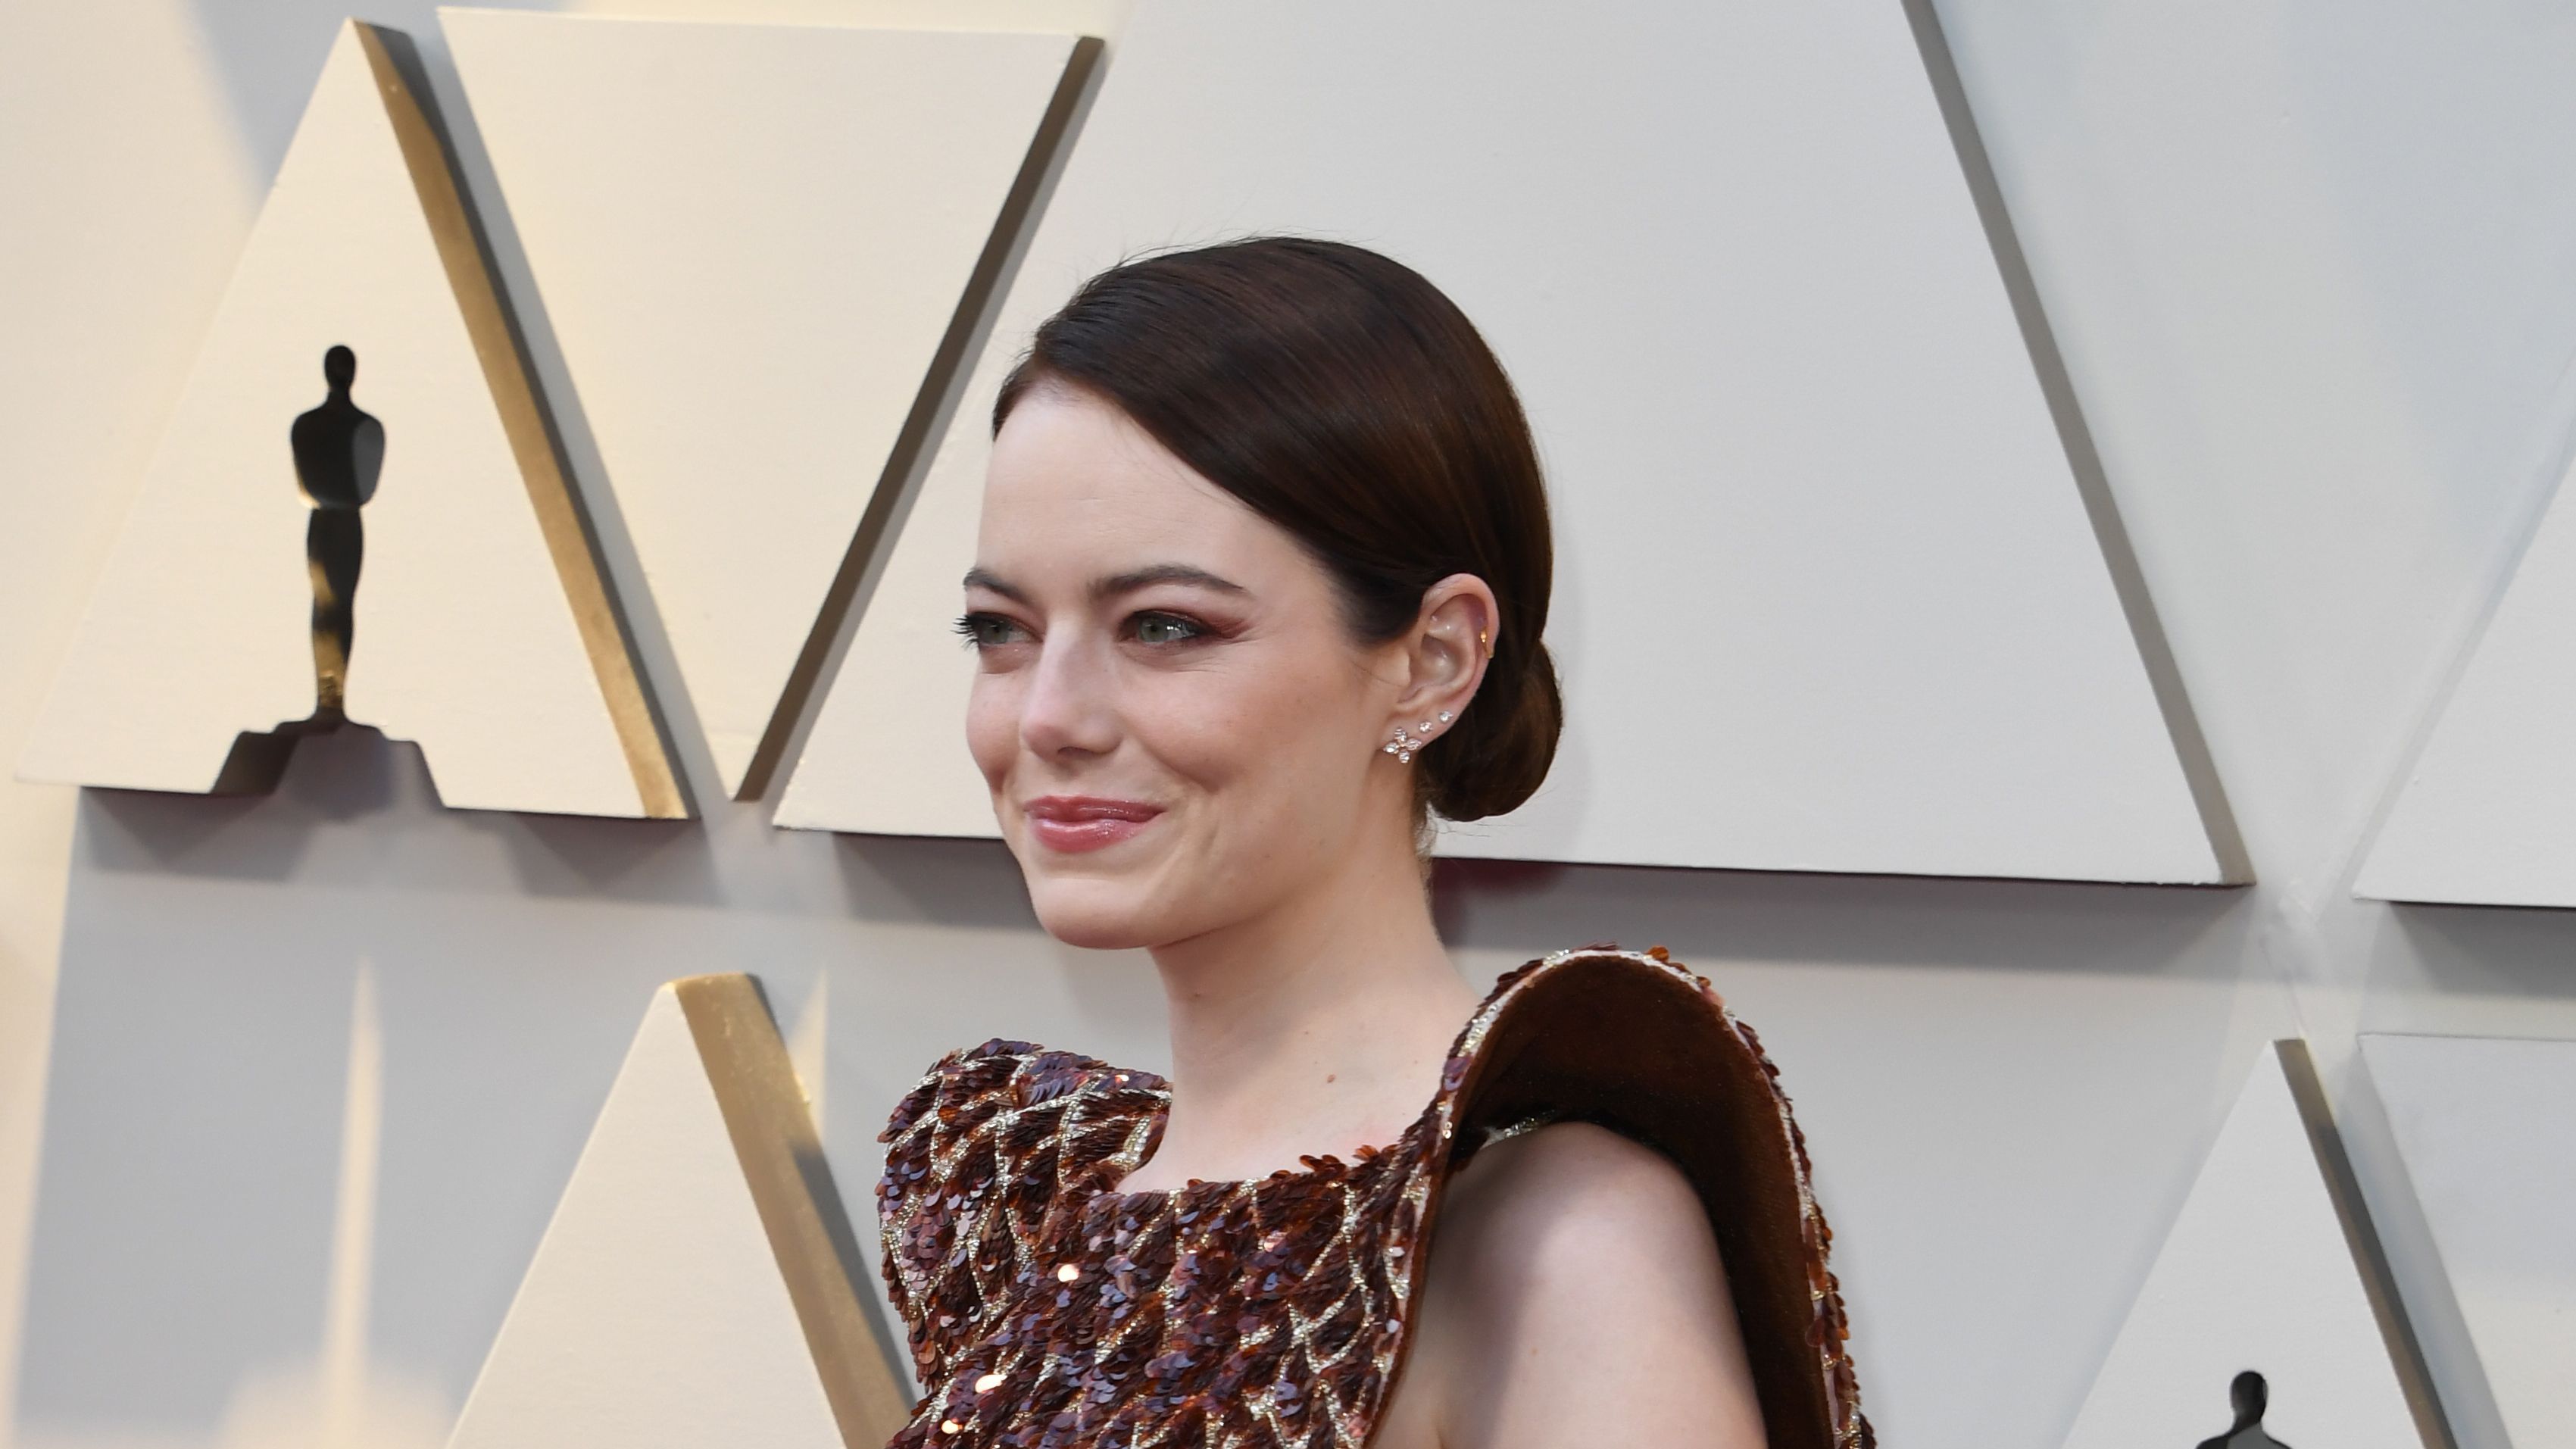 Emma Stone Wore a Louis Vuitton Gown to the Oscars That's Making